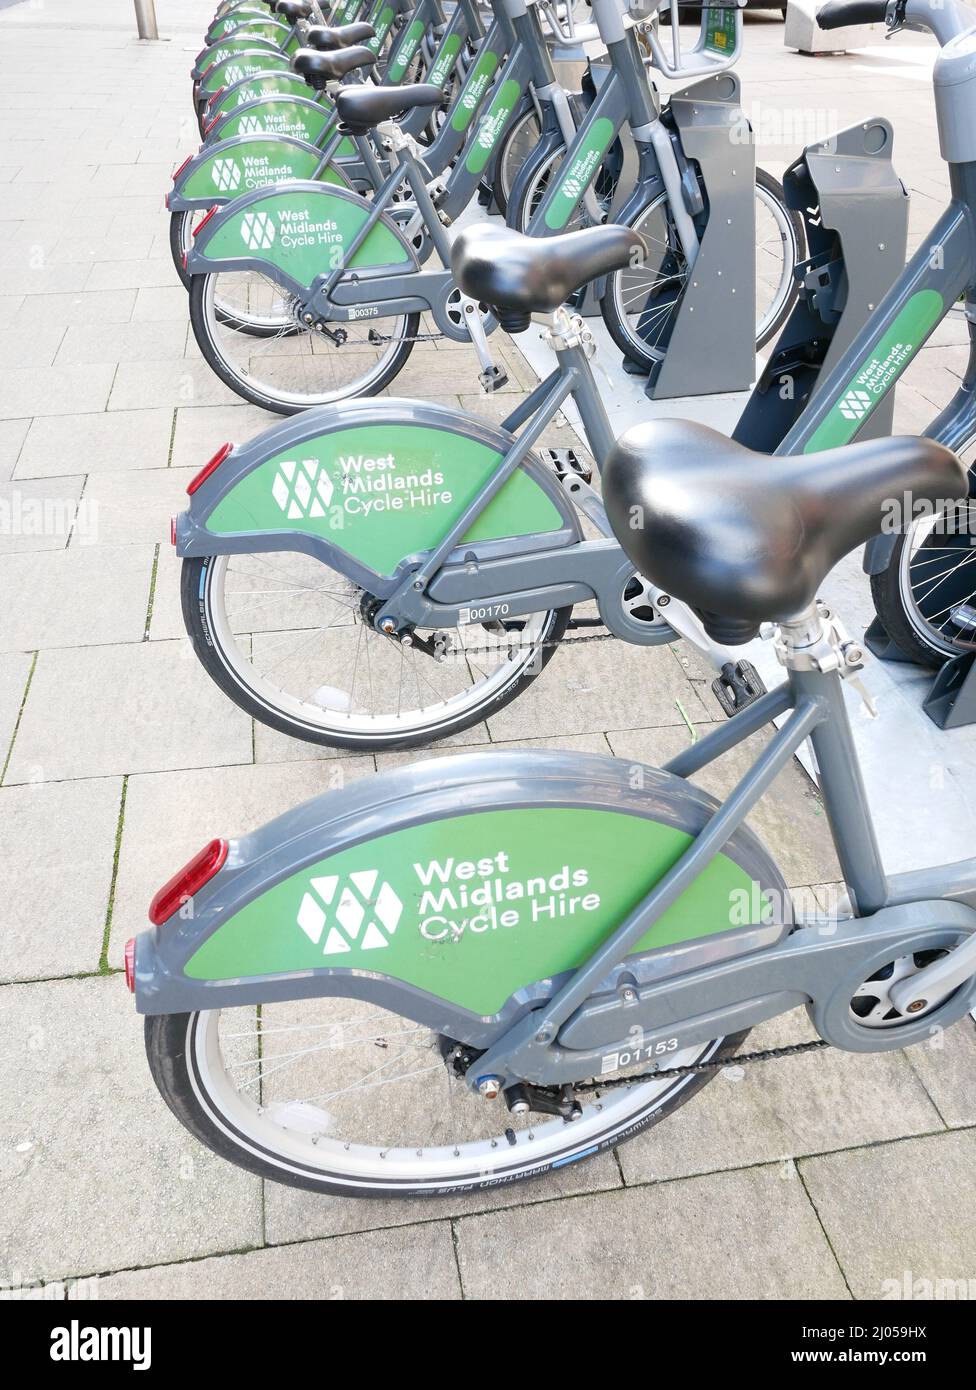 West Midlands Cycle Hire bicycles on street stand in Birmingham, UK Stock Photo